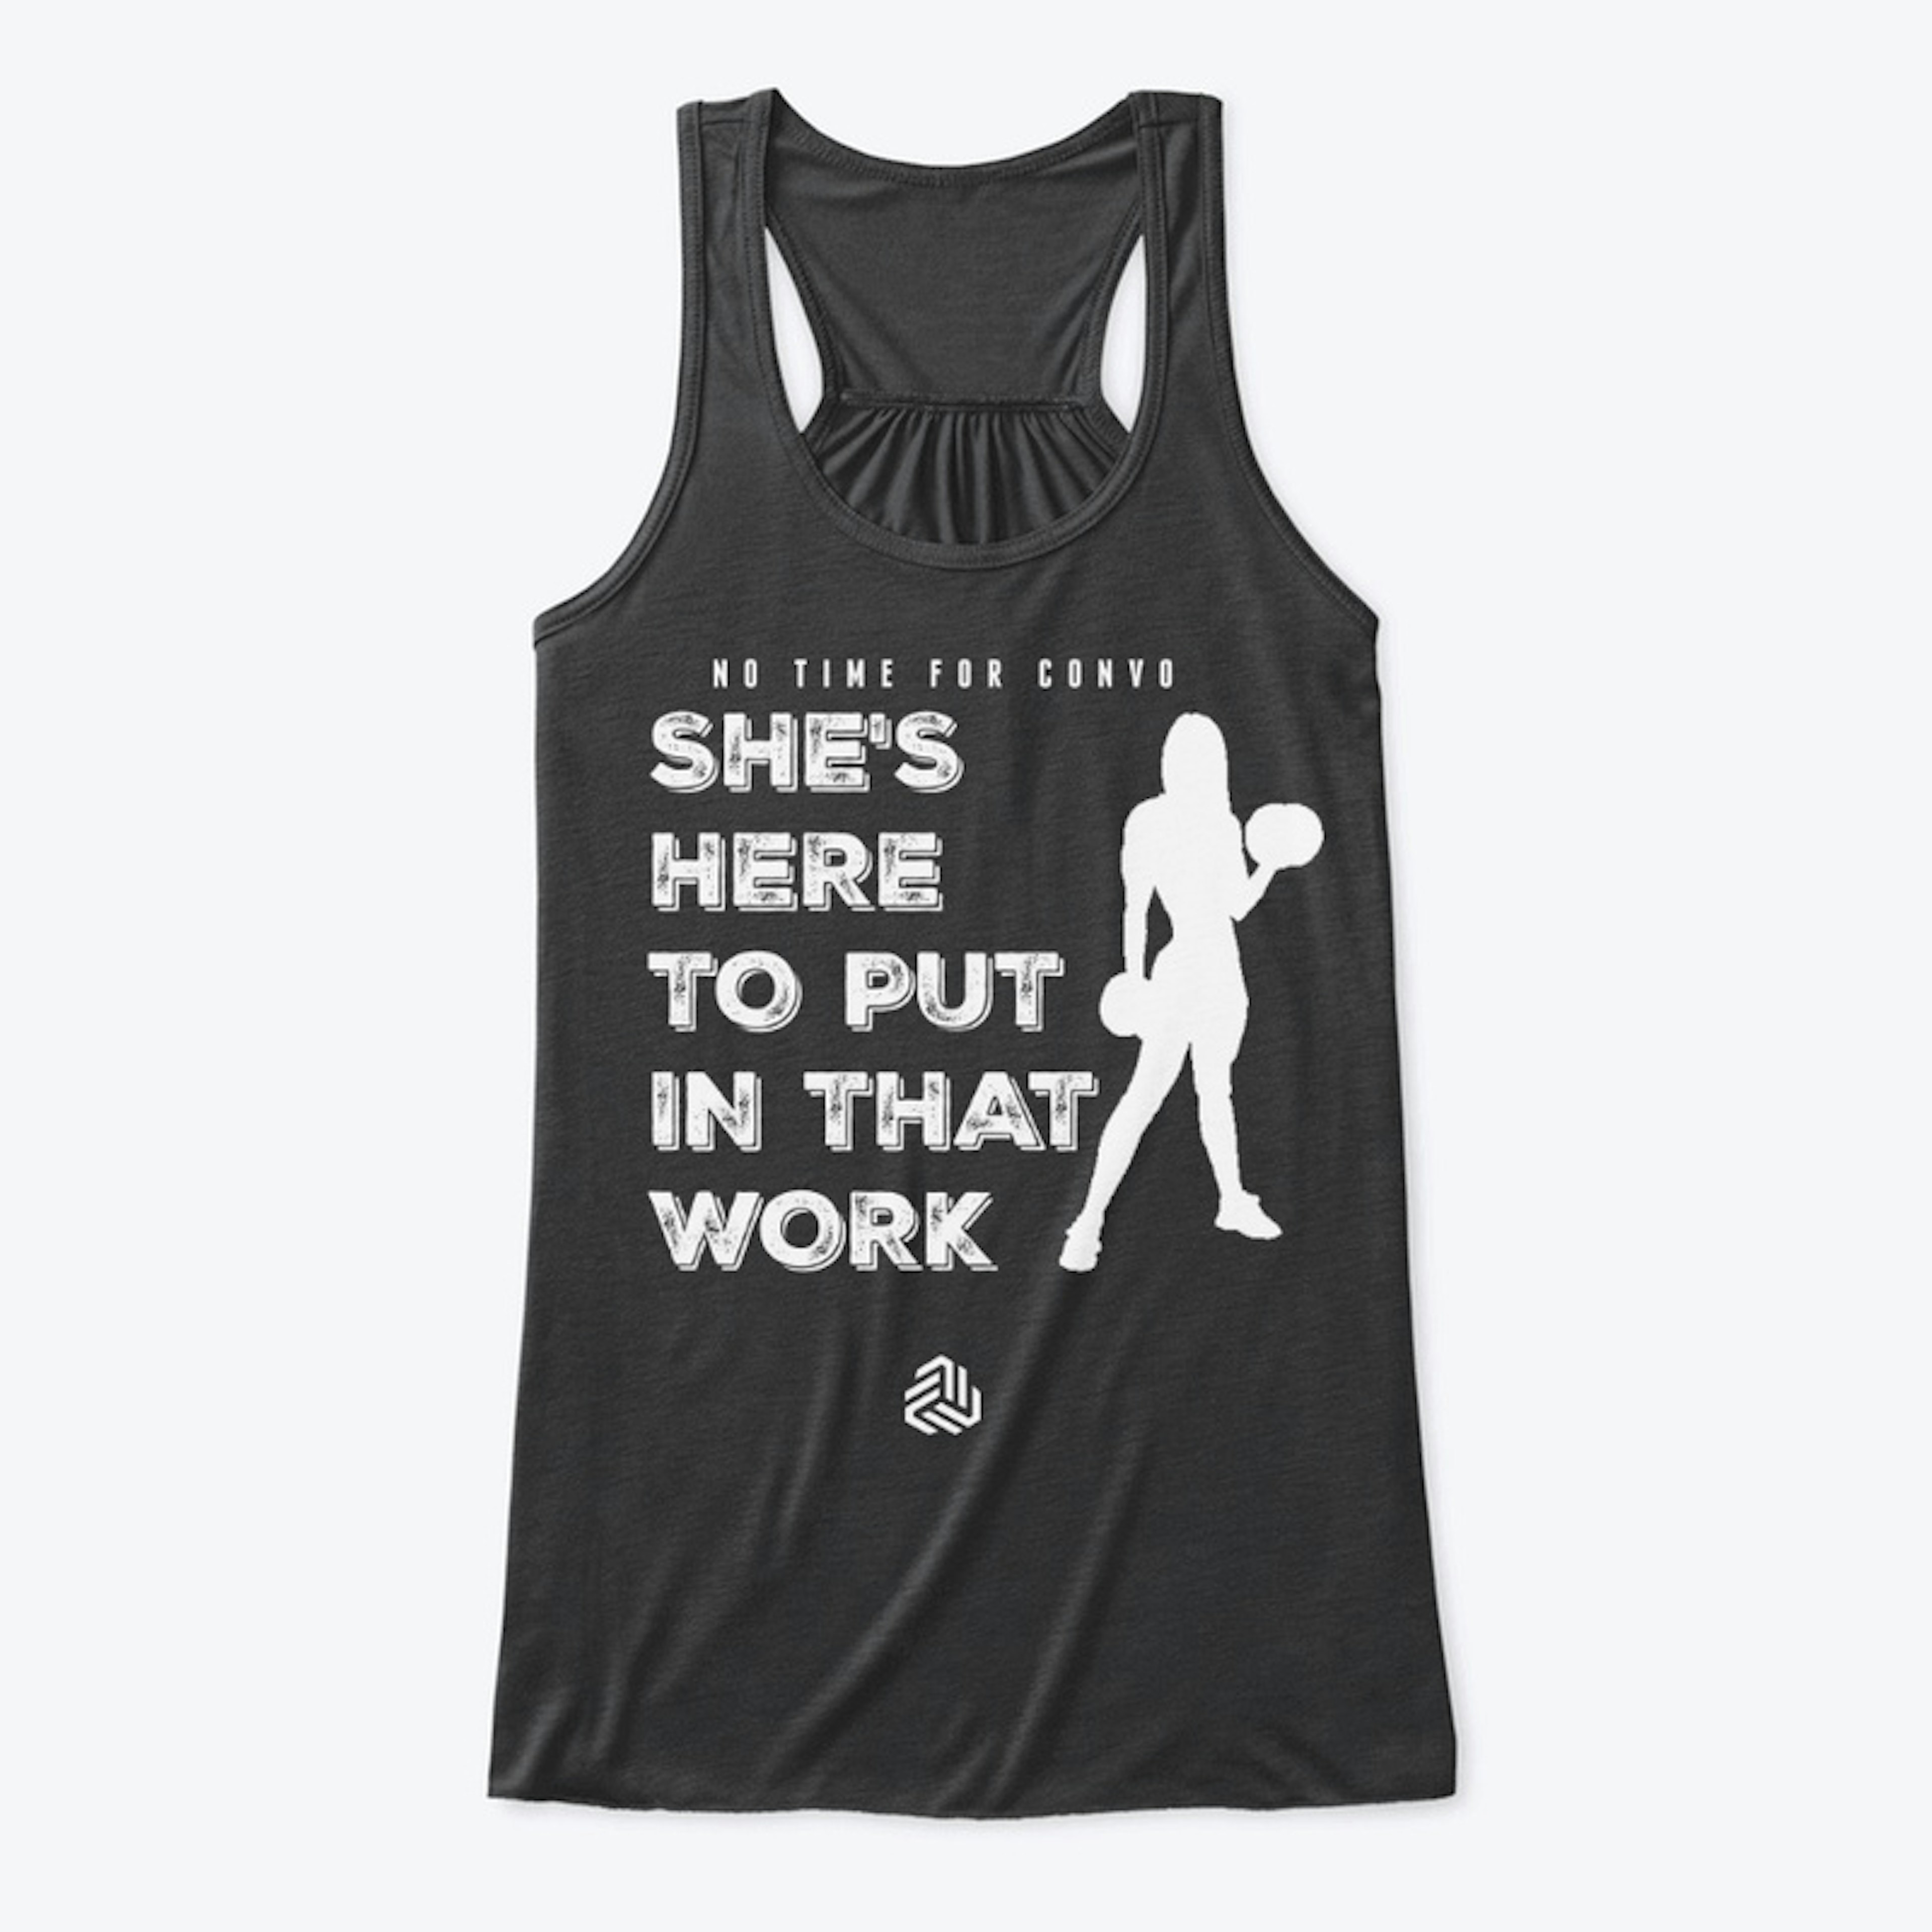 SHE PUTS IN WORK: Fitness Series 2